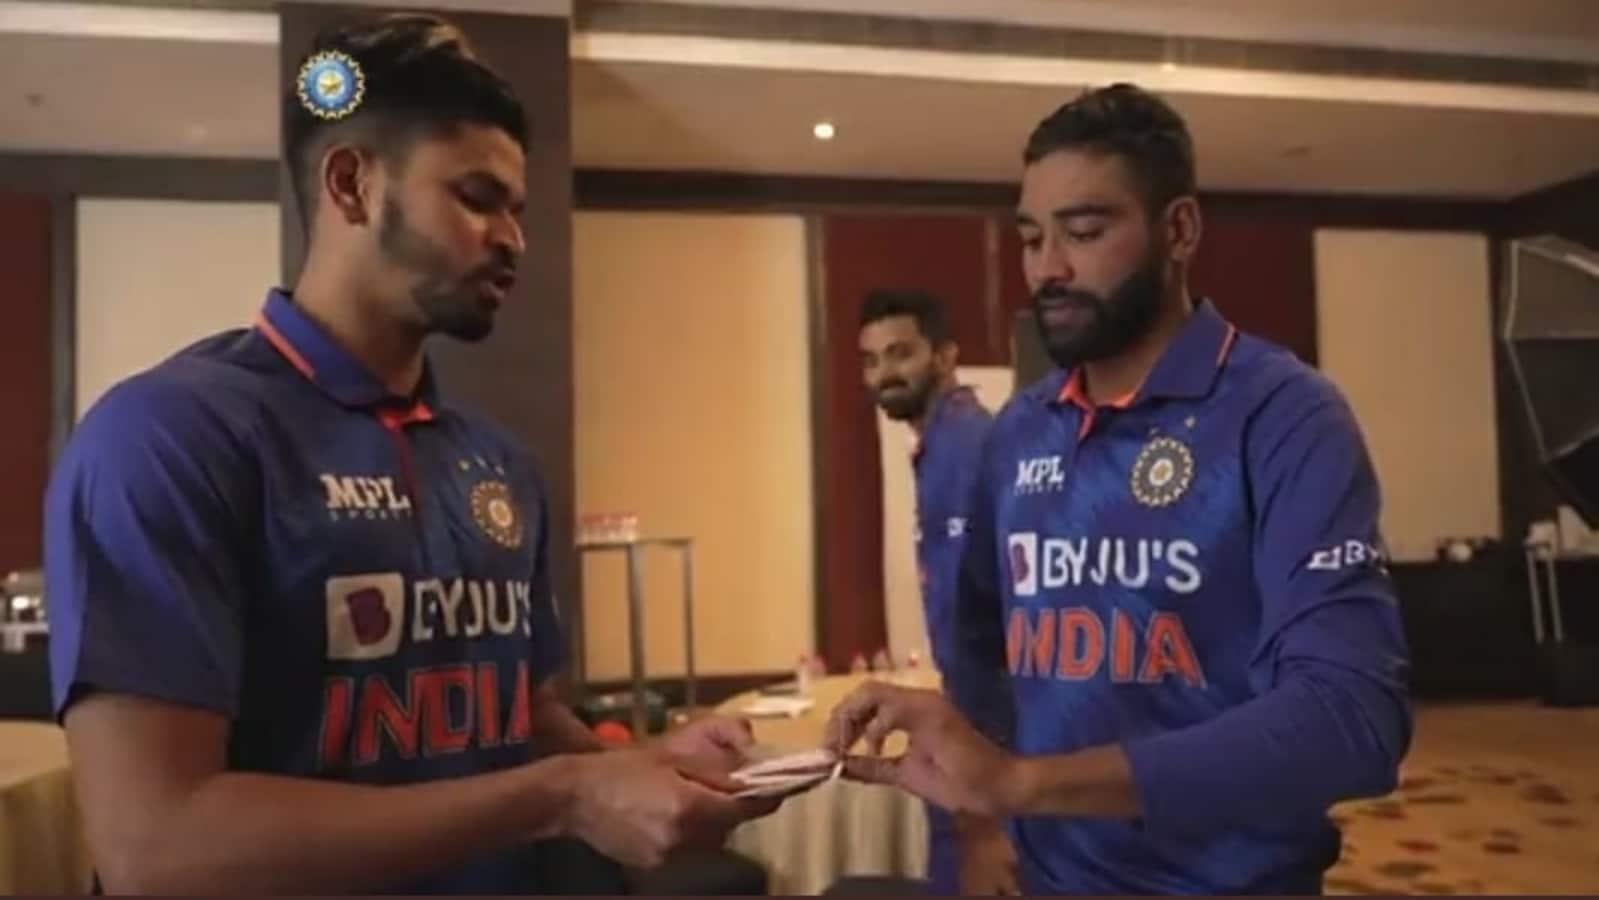 Magician Shreyas Iyer leaves Mohammed Siraj stunned with card trick, BCCI shares fun video - WATCH | Cricket - Hindustan Times